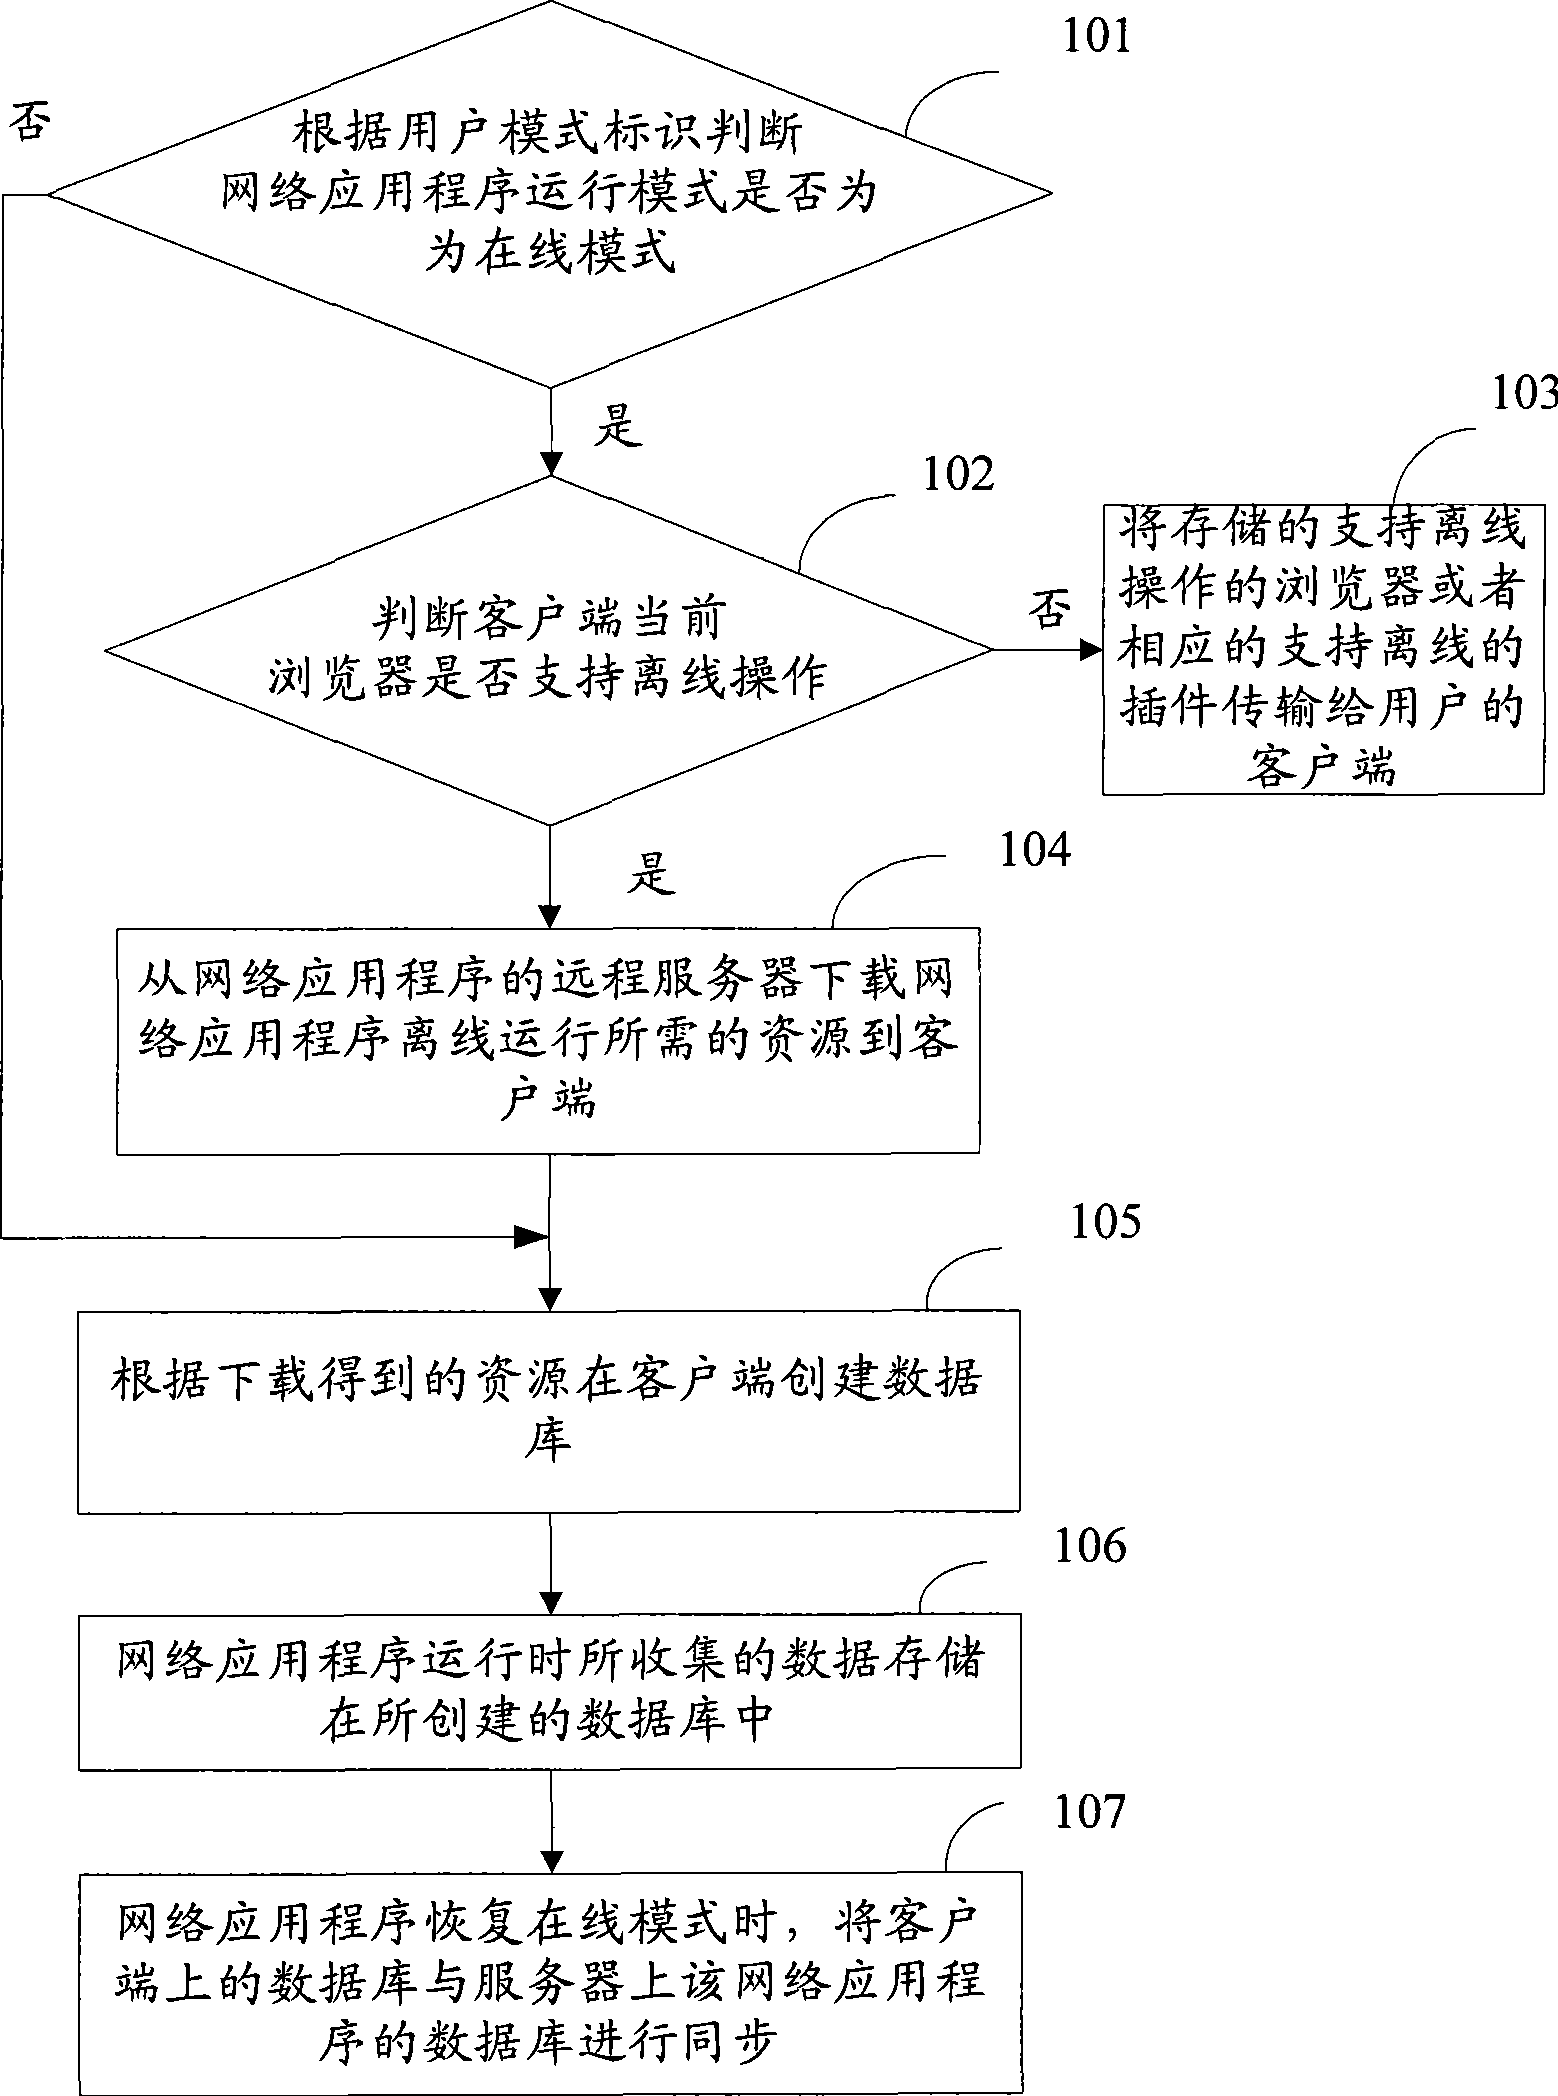 Off-line data collecting method for network application program